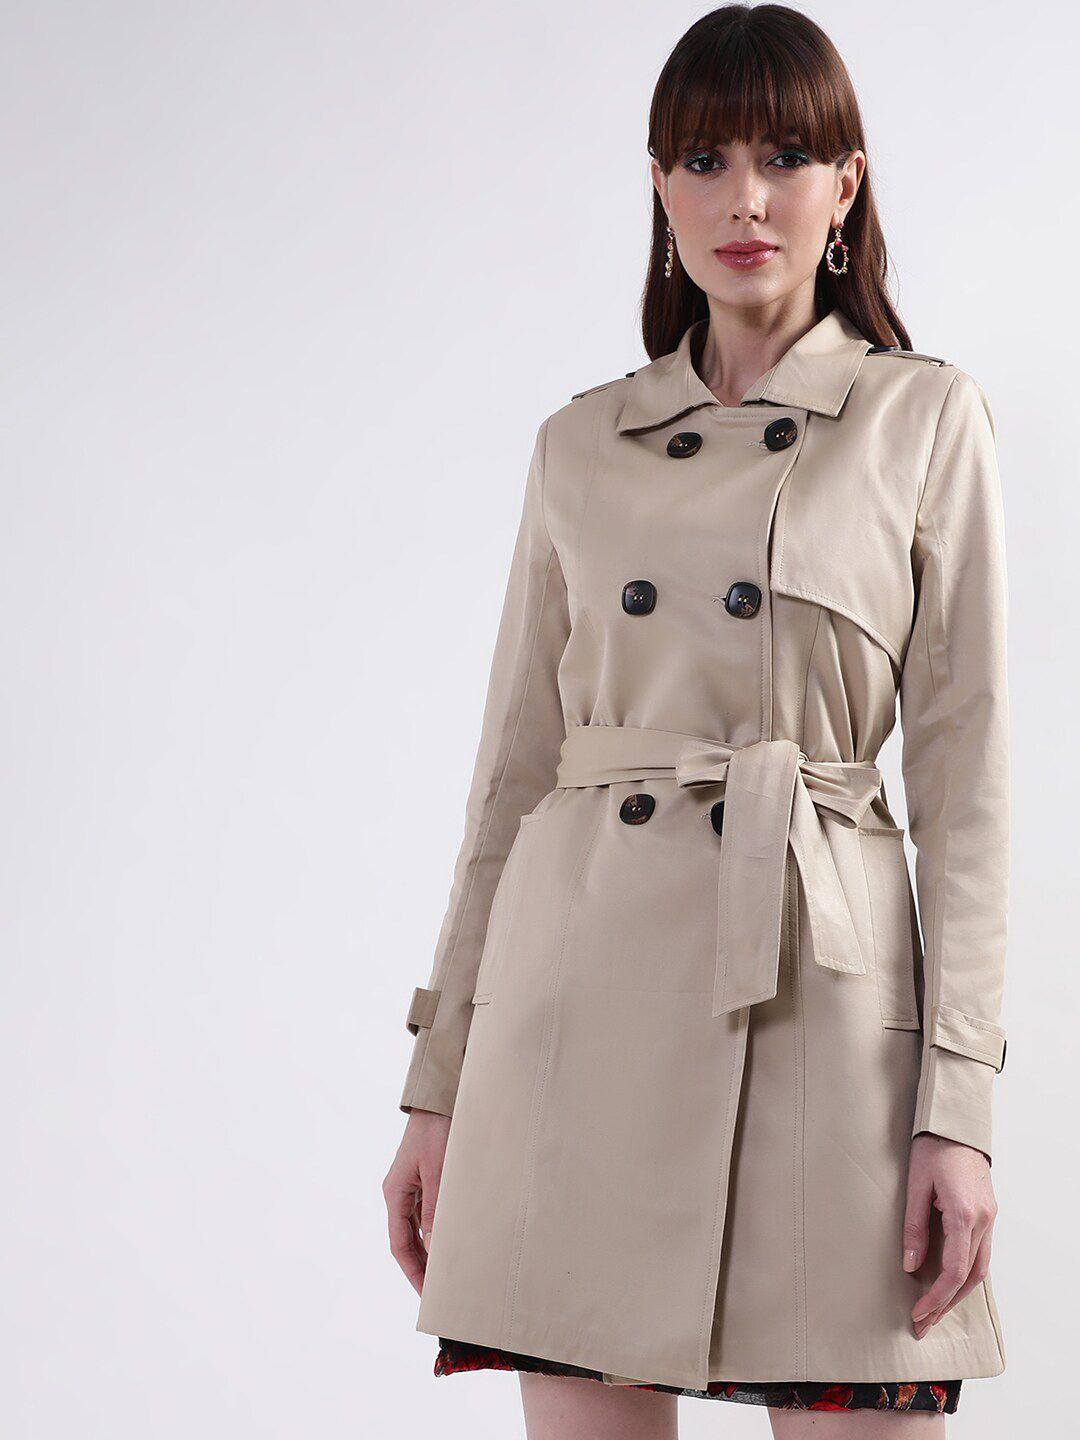 centrestage women double-breasted longline trench coats